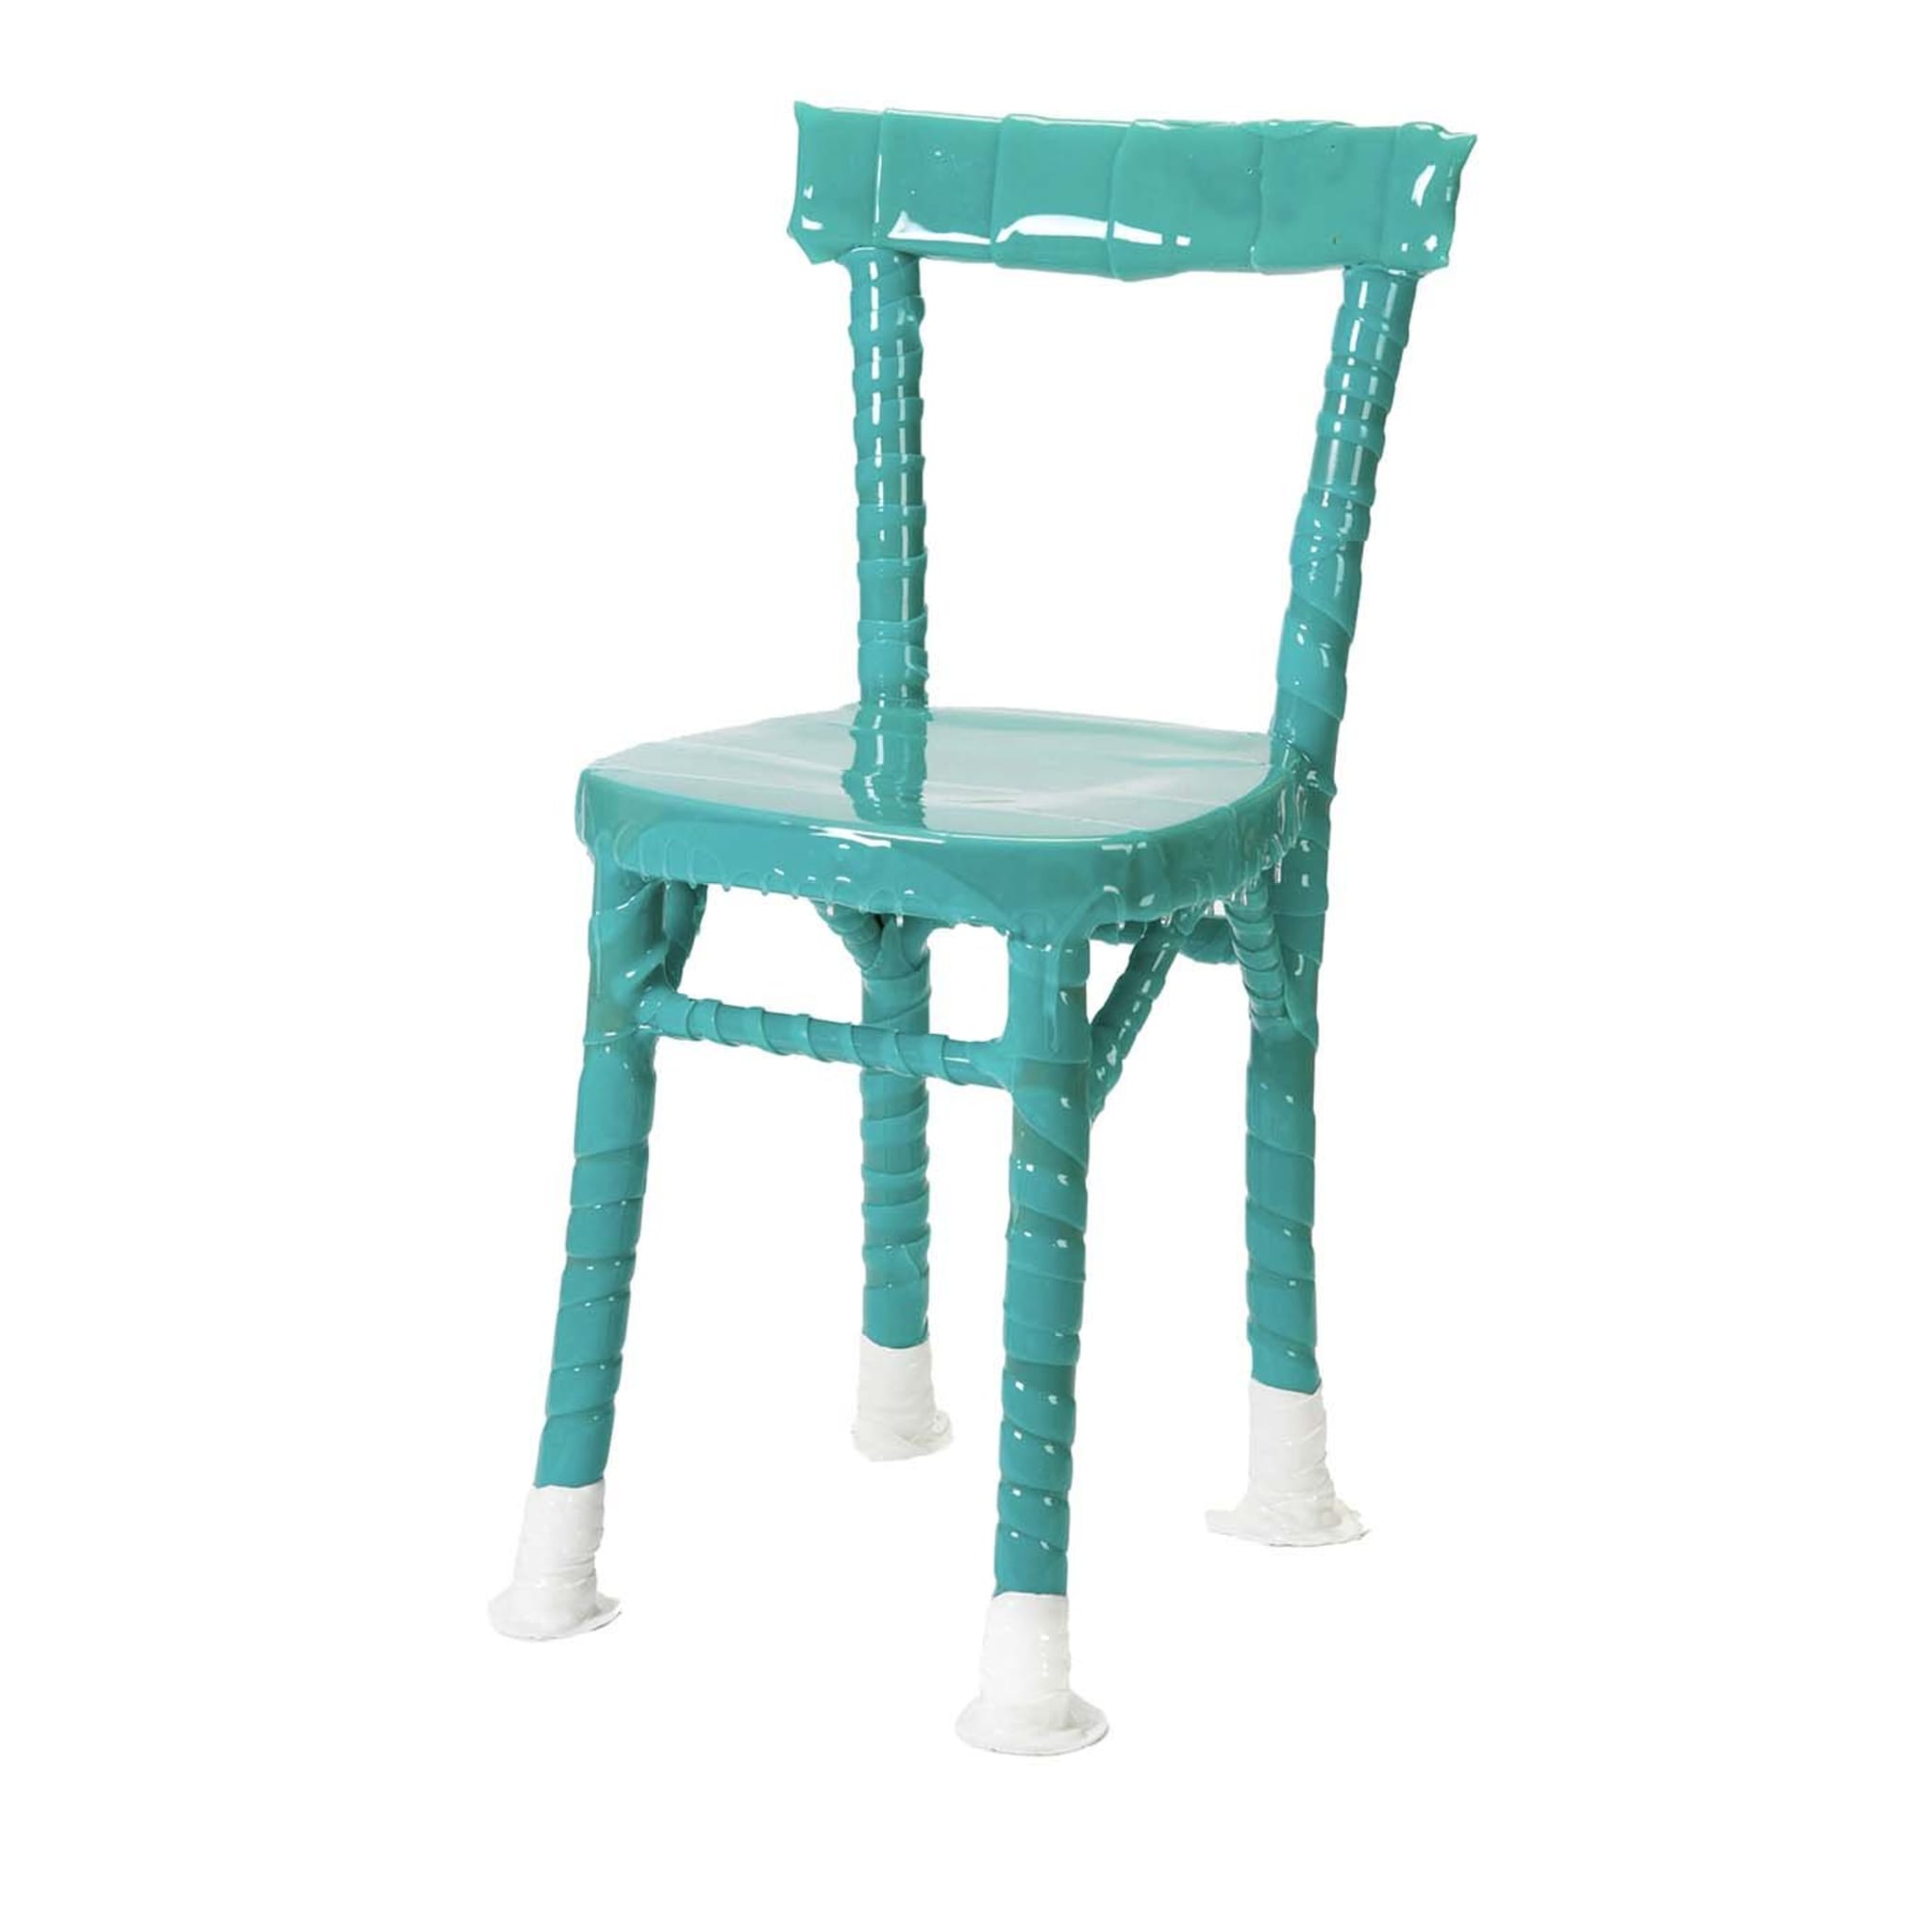 N. 07/20 One-Off chair by Paola Navone - Main view